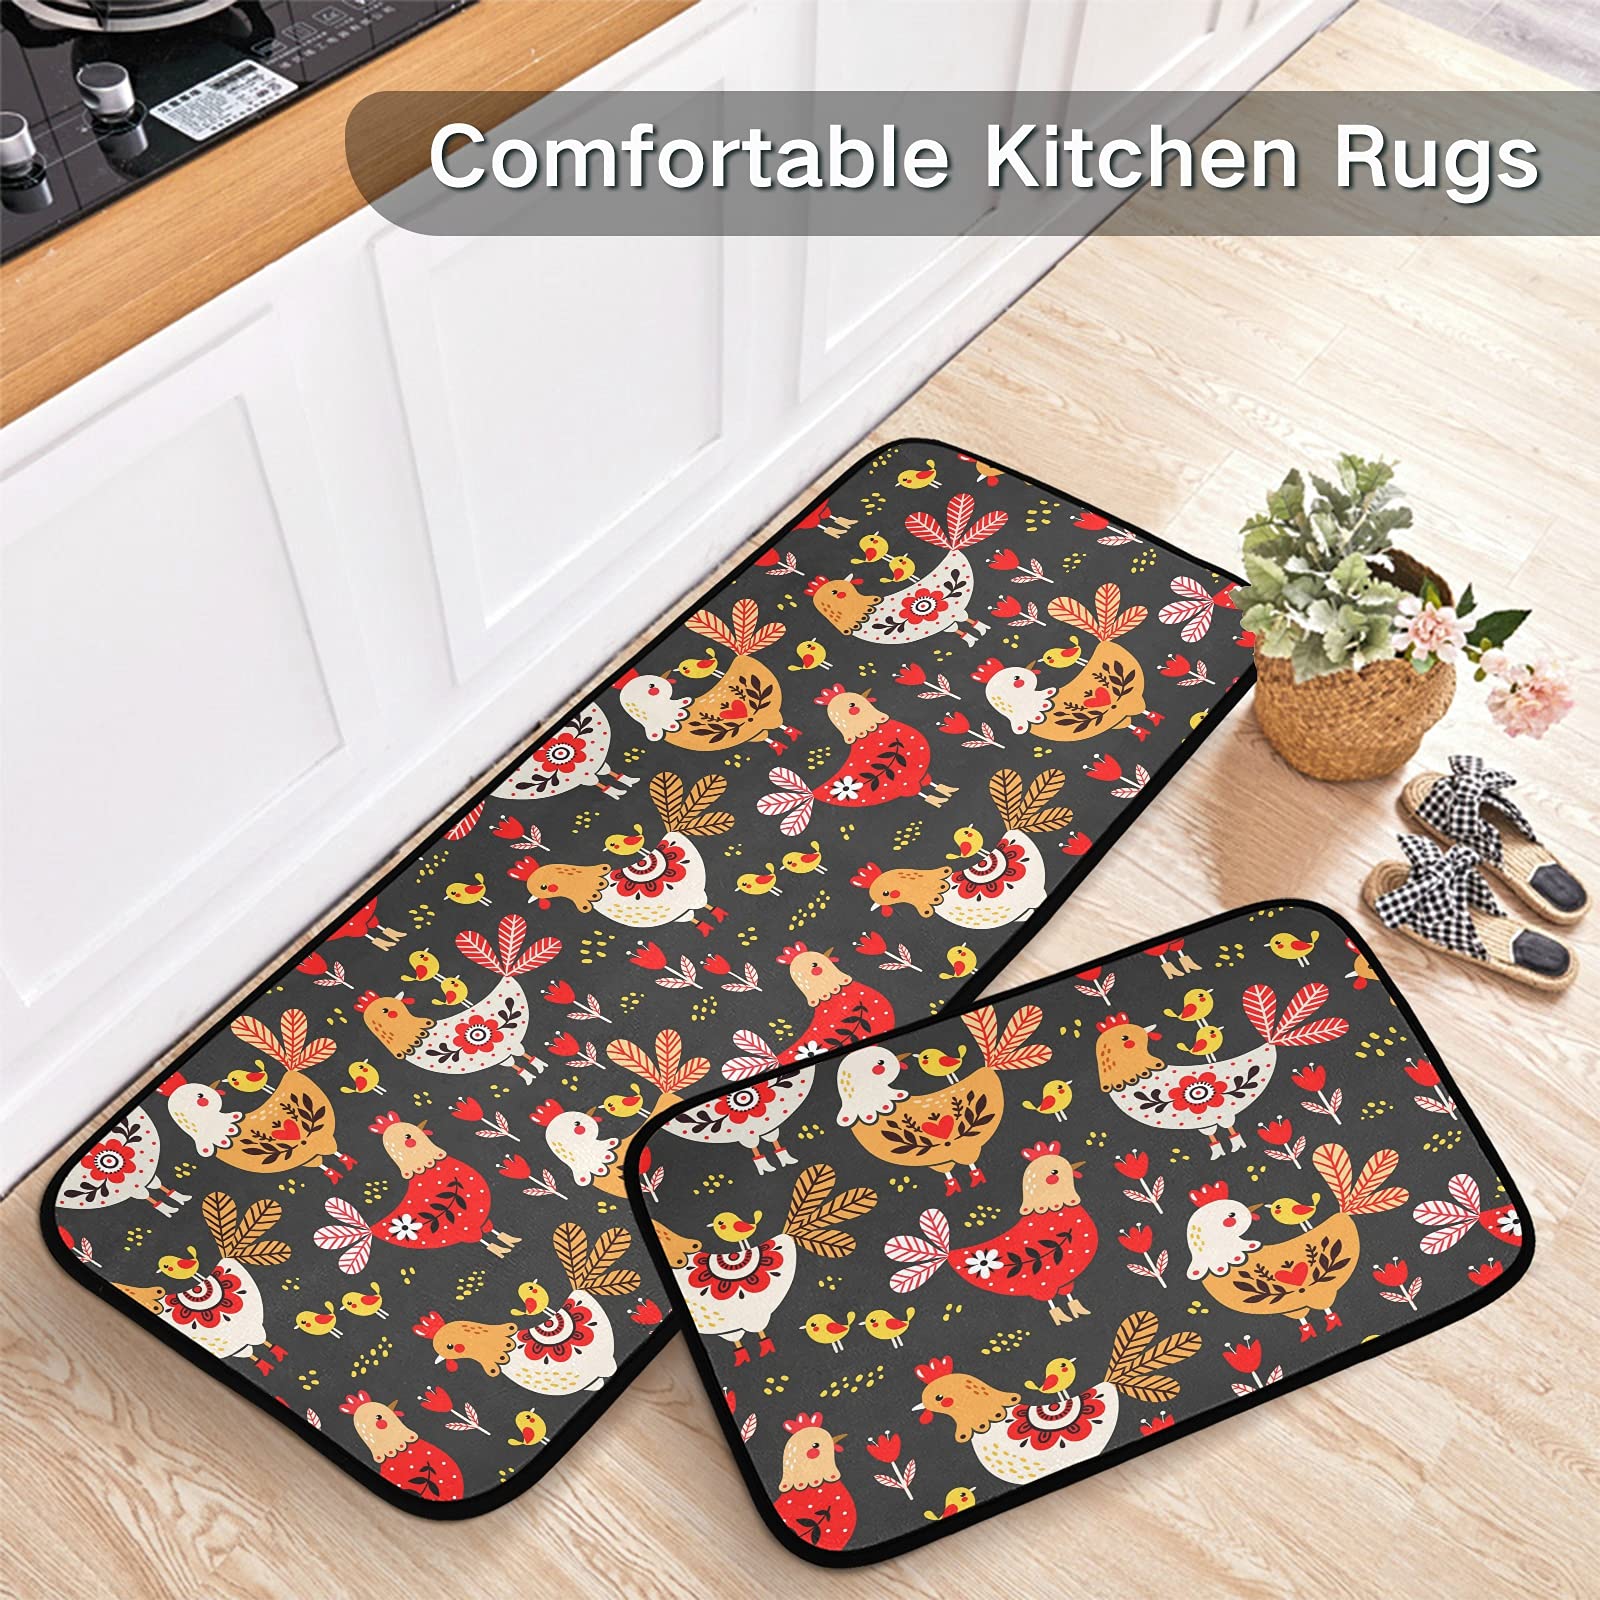 2 Piece Kitchen Rugs and Mats, Cute Rooster Chicken Cushioned Kitchen Mat Anti-Fatigue Comfort Floor Mat Non Slip Kitchen Rug Standing Mats for Kitchen, Sink, Bathroom, Laundry(20x47 Inch+20x28 Inch)